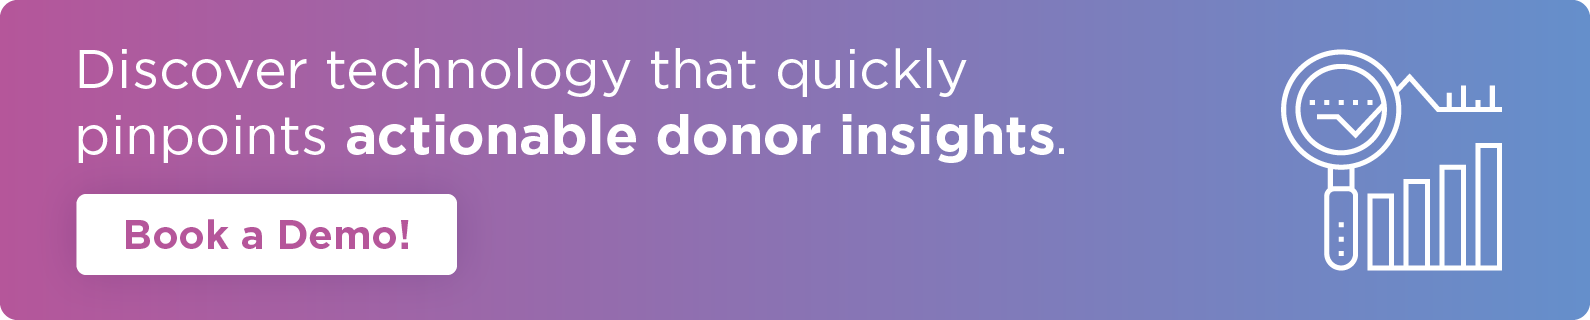 Contact GivingDNA for a demo of technology that pinpoints actionable insights using donor segmentation.